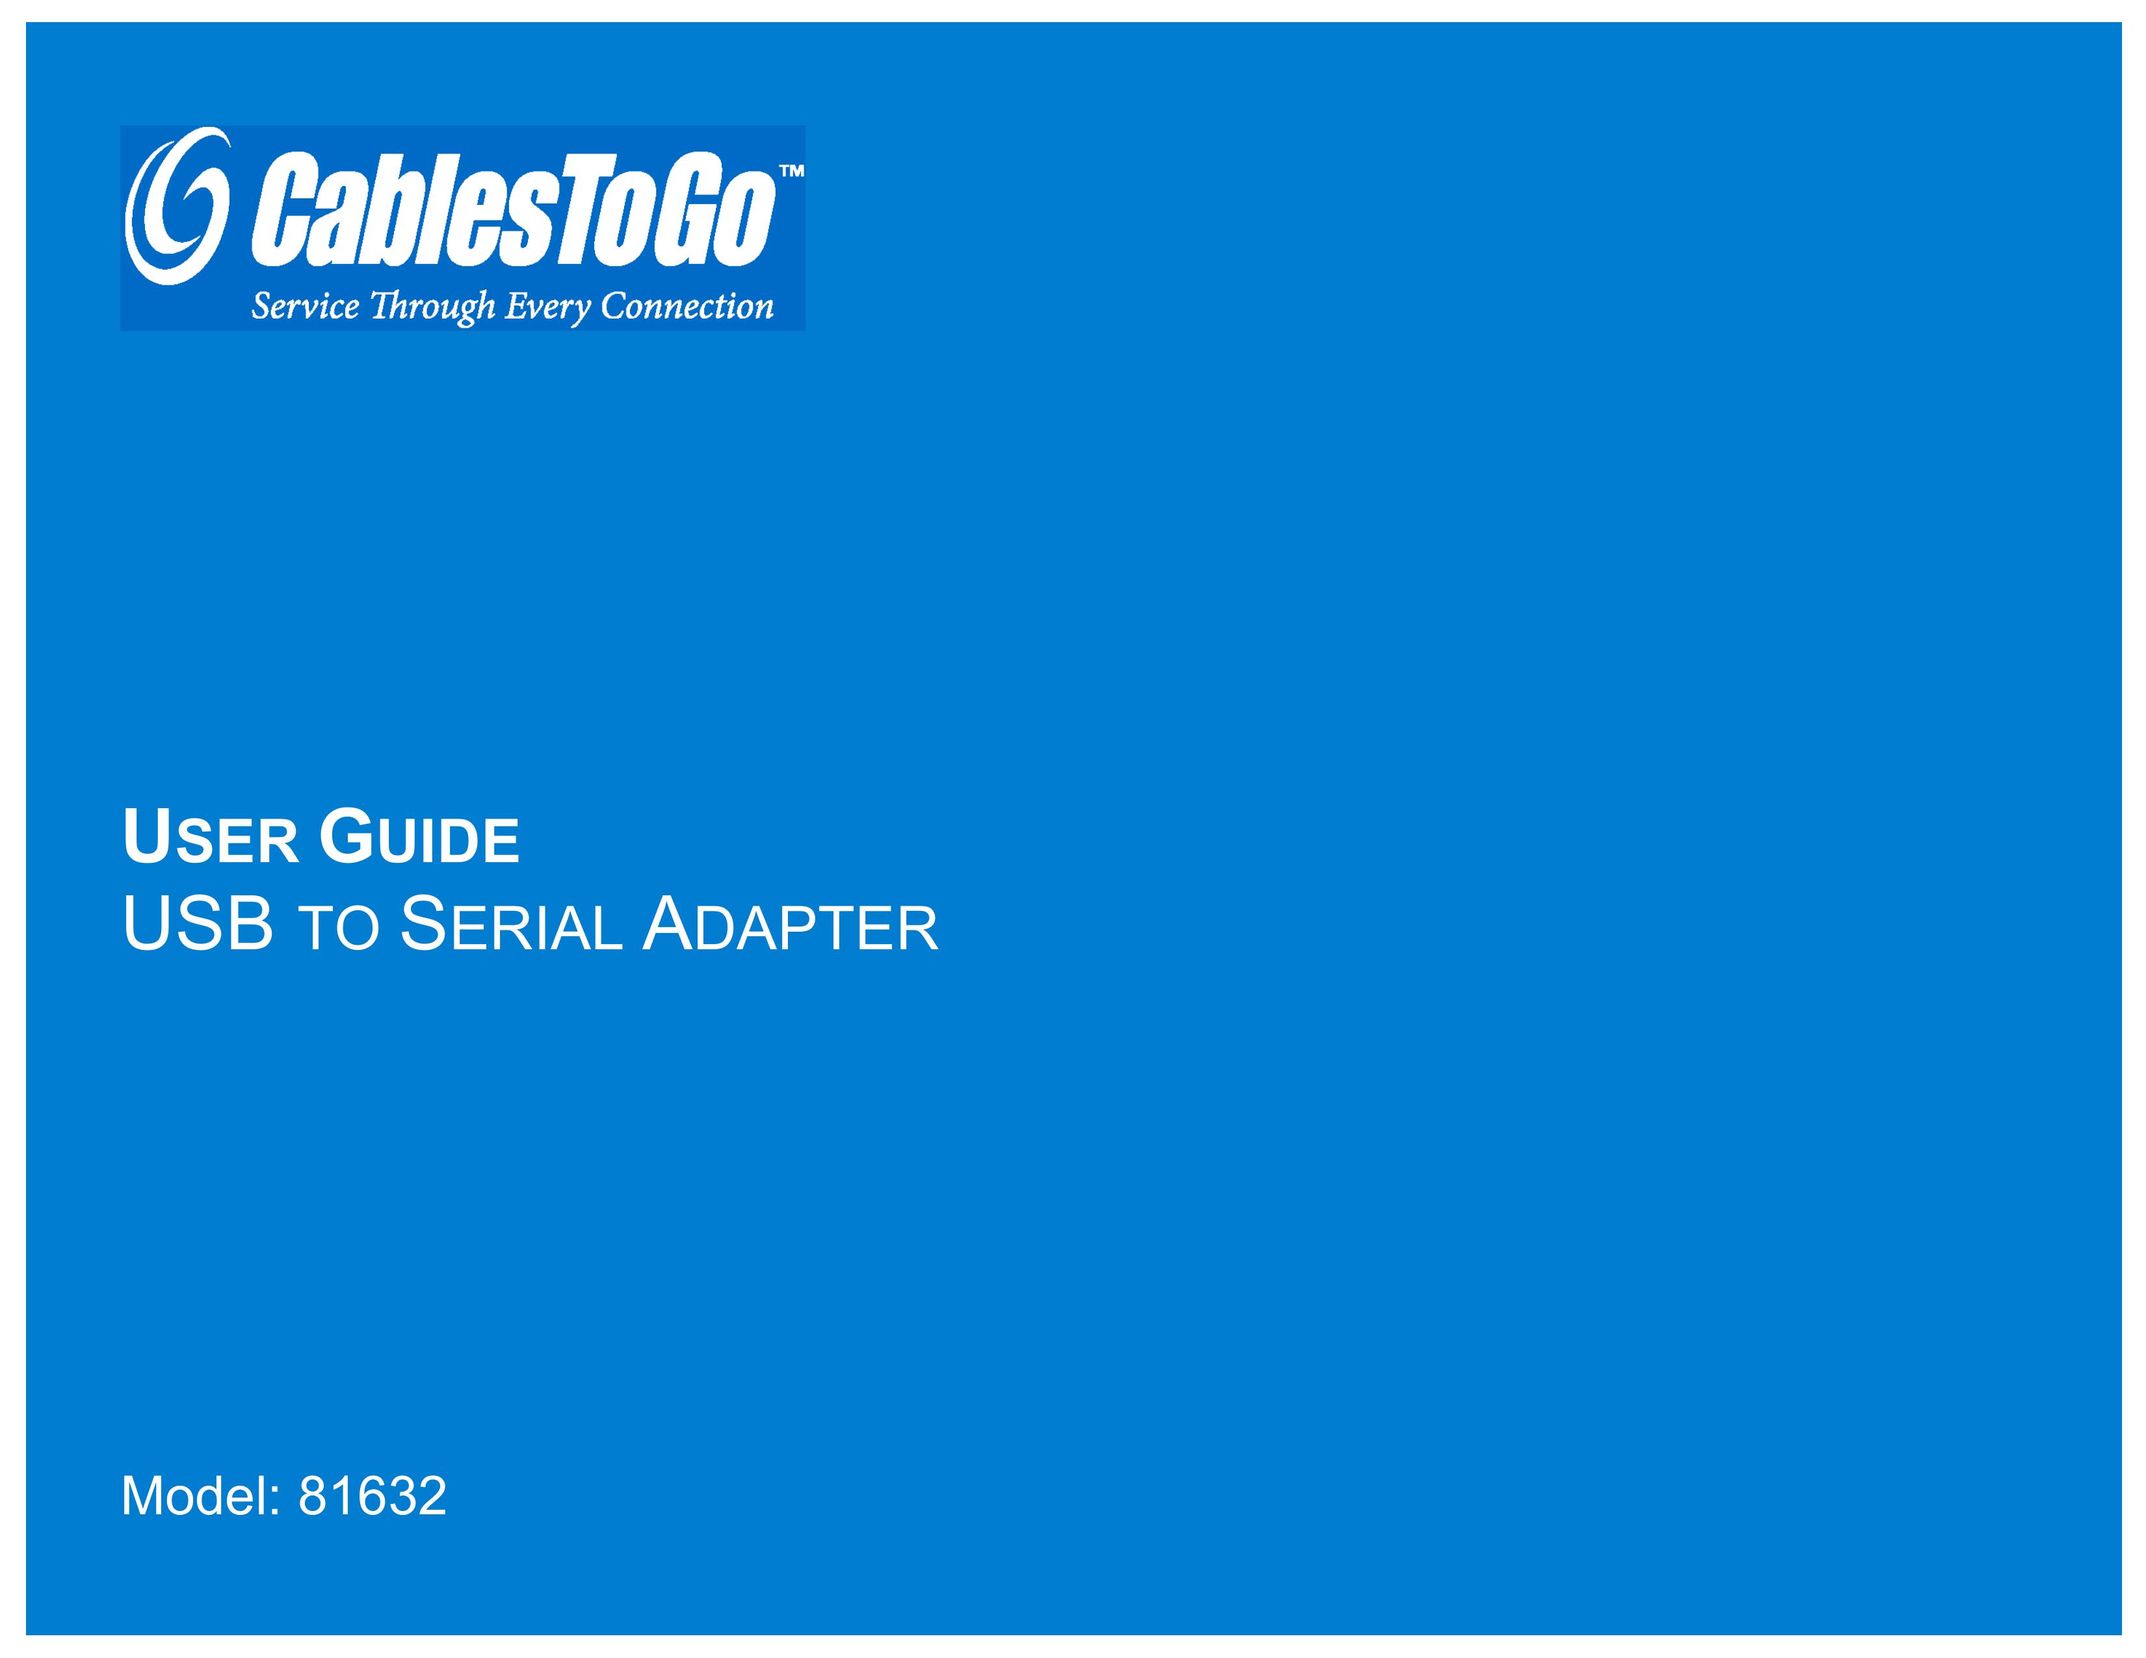 Cables to Go 81632 Network Card User Manual